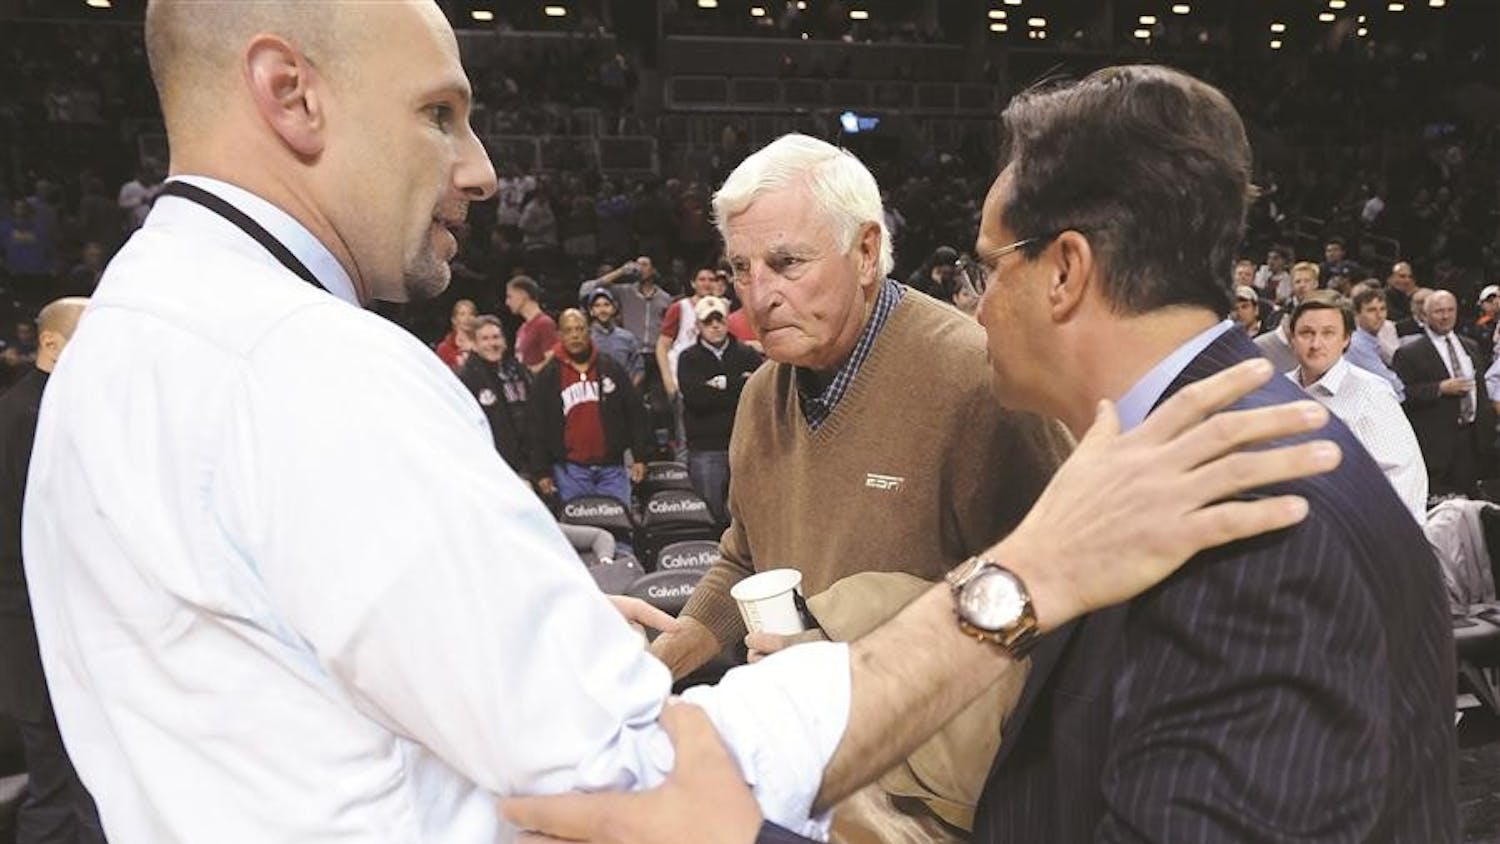 Head coach Tom Crean runs over to former head coach Bob Knight to shake his hand after the Indiana Georgia Progressive Legends Classic tournament game at the Barclay Center in Brooklyn, NY. Monday, Nov. 19, 2012. ESPN analyst Dan Shulman is at left.